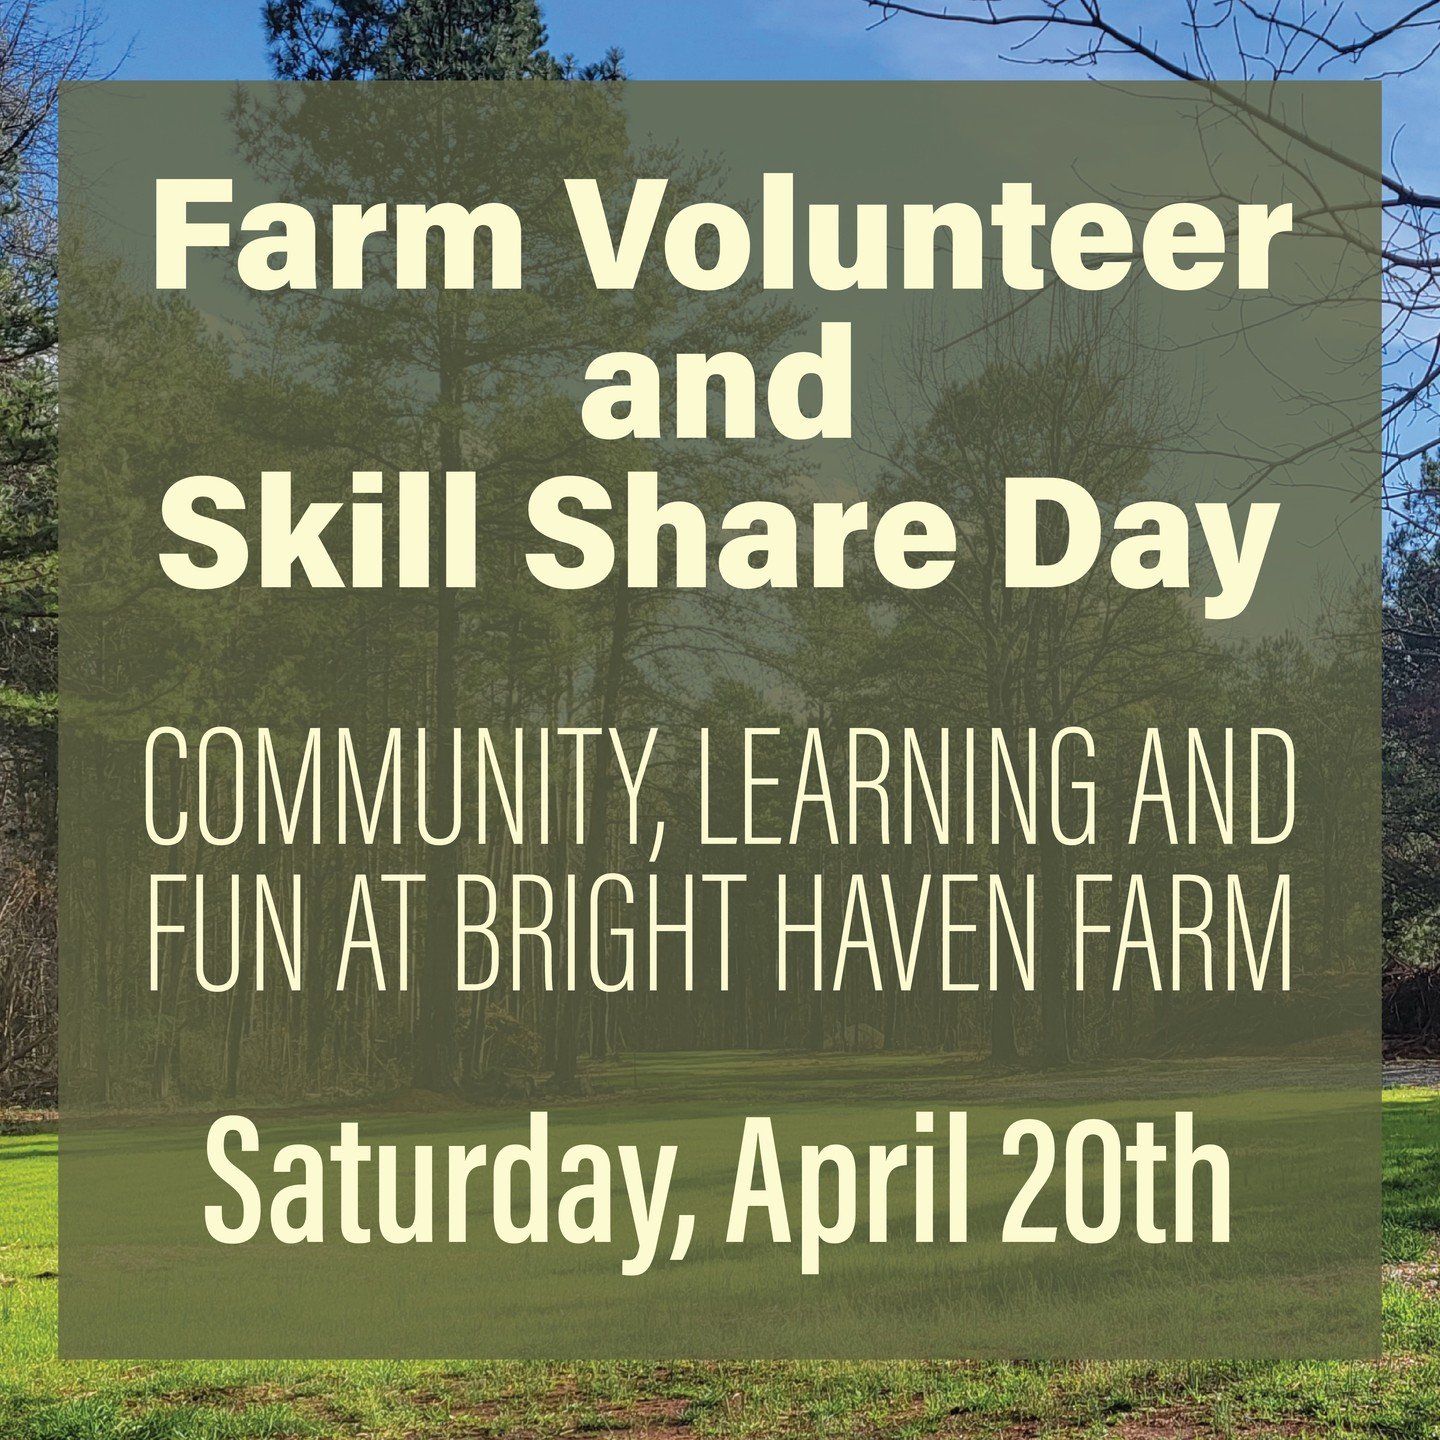 We've had a few people ask if there are any tools they can bring for tomorrow's volunteer day, and the answer is YES! Here's what would be helpful to have: 
Gloves
Cordless drill
Drill bits
Shovel
Wheel barrow
Water
Lunch or snacks to share
Sunscreen